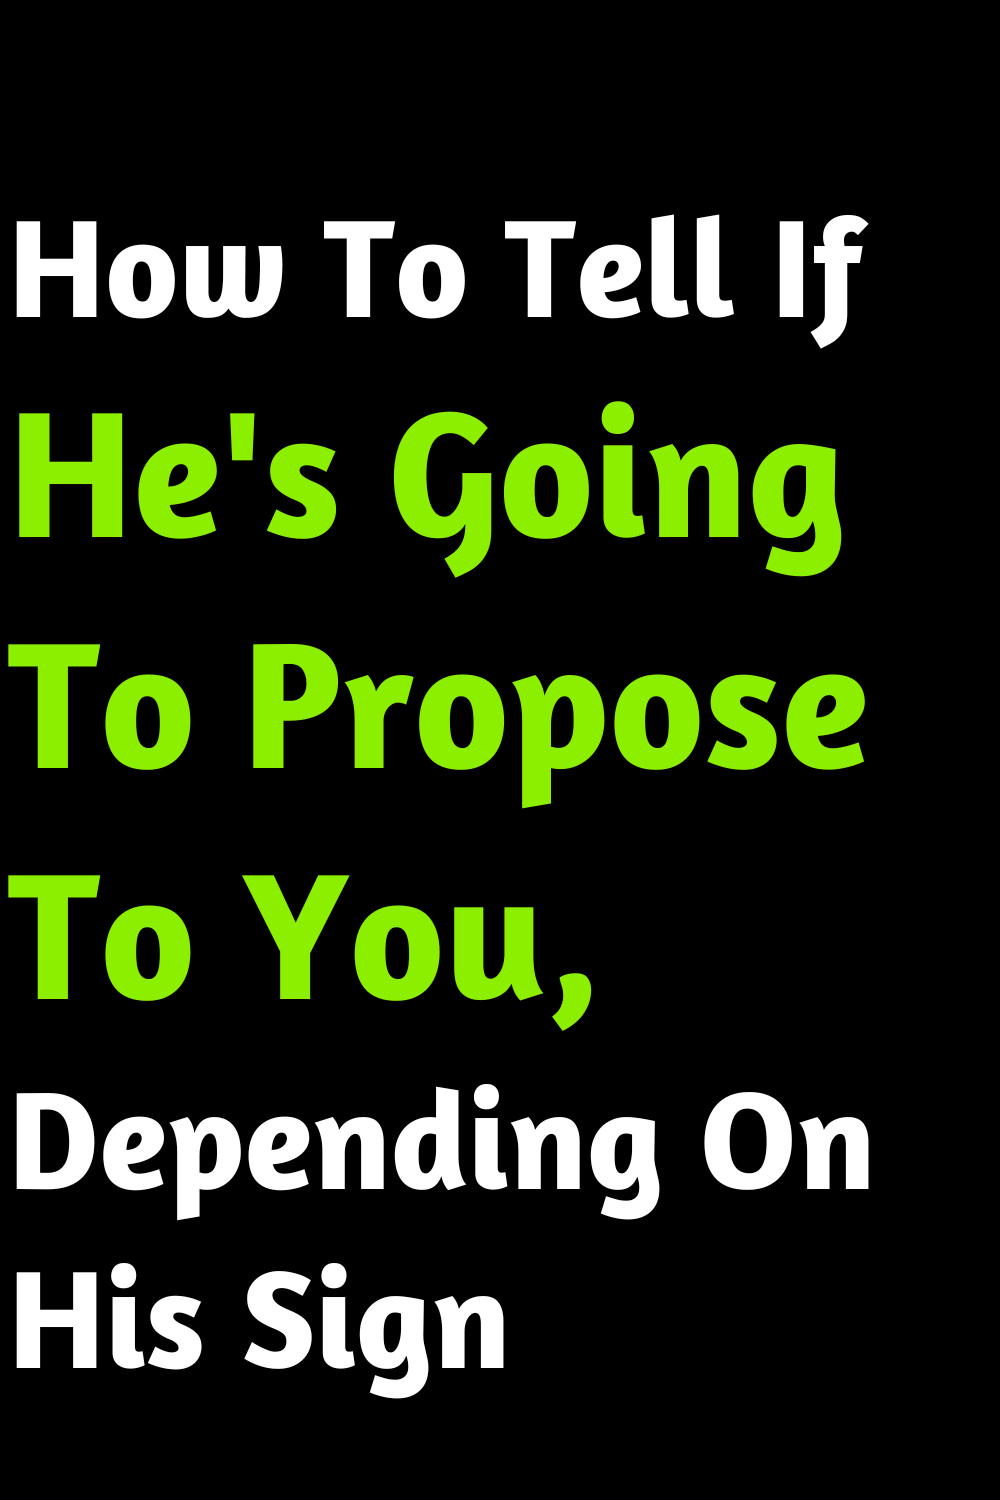 How To Tell If He's Going To Propose To You, Depending On His Sign